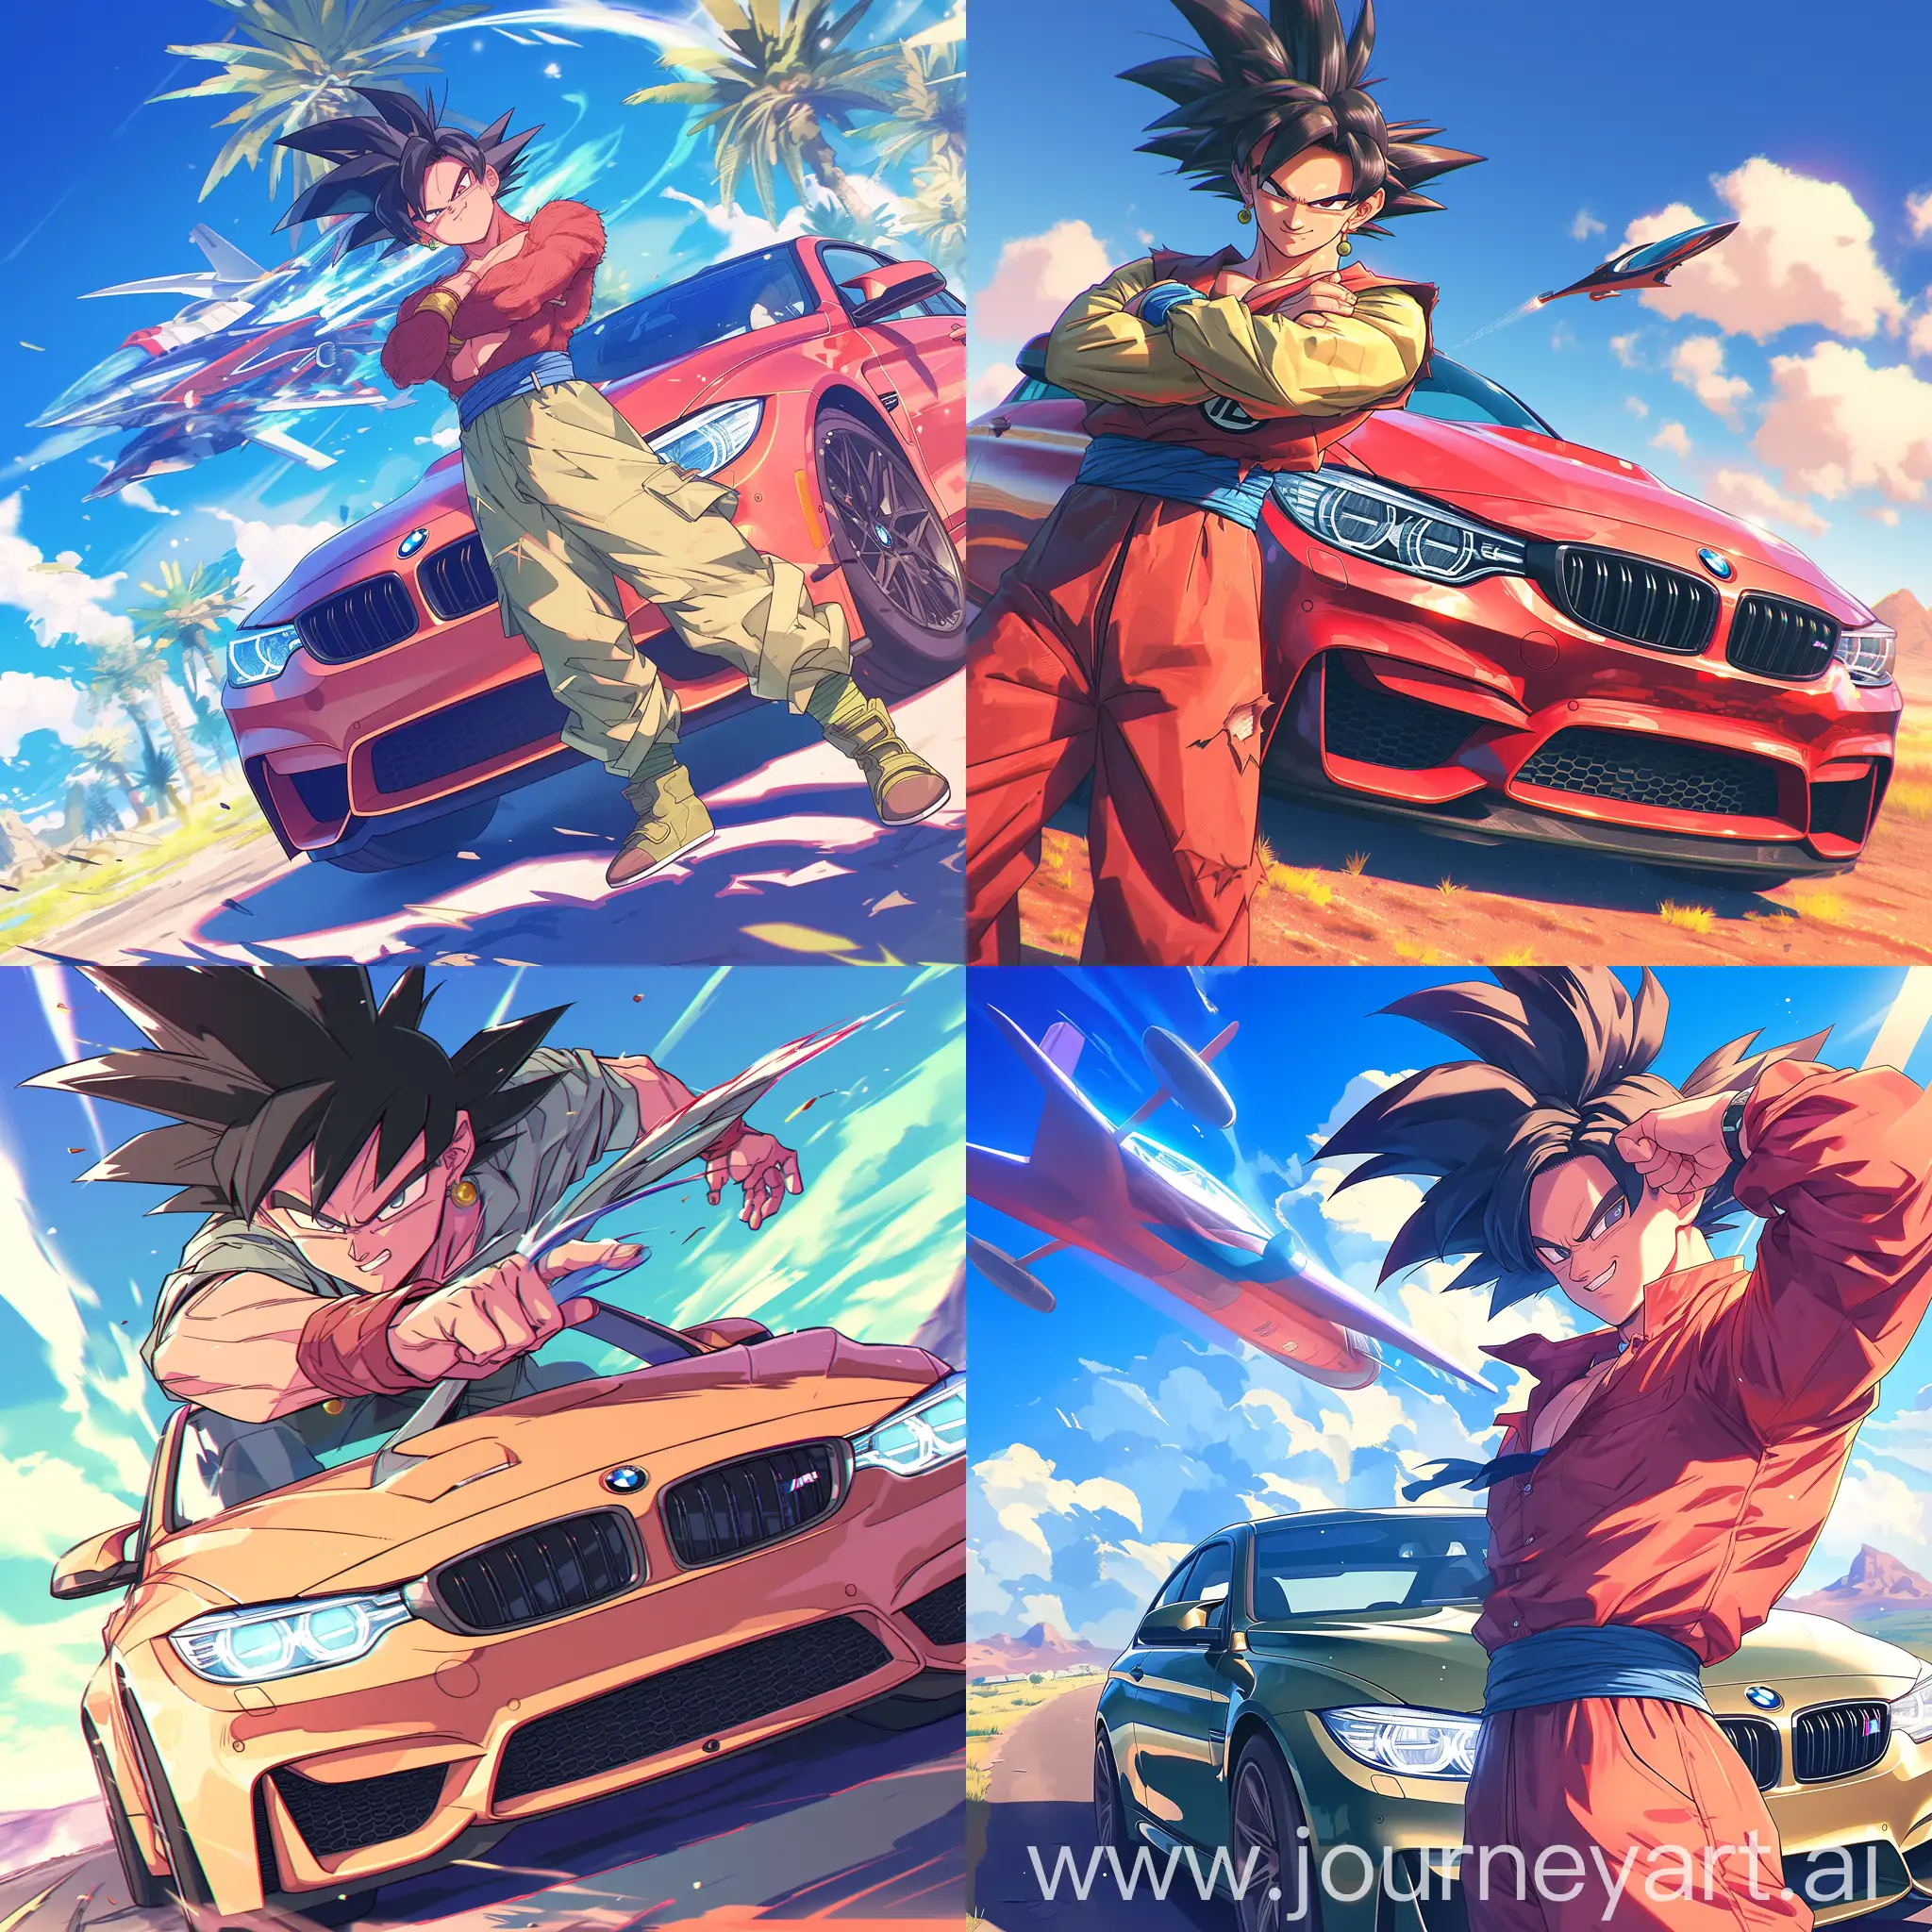 Long shot of Dragon Ball's Goku dynamic posing with BMW M4, vibrant colors, energy aura visible, clear sunny day, Dragon Ball Z era, epic and playful atmosphere, high-resolution, detailed artwork by Akira Toriyama --ar 1:1 --s 750 --niji 6